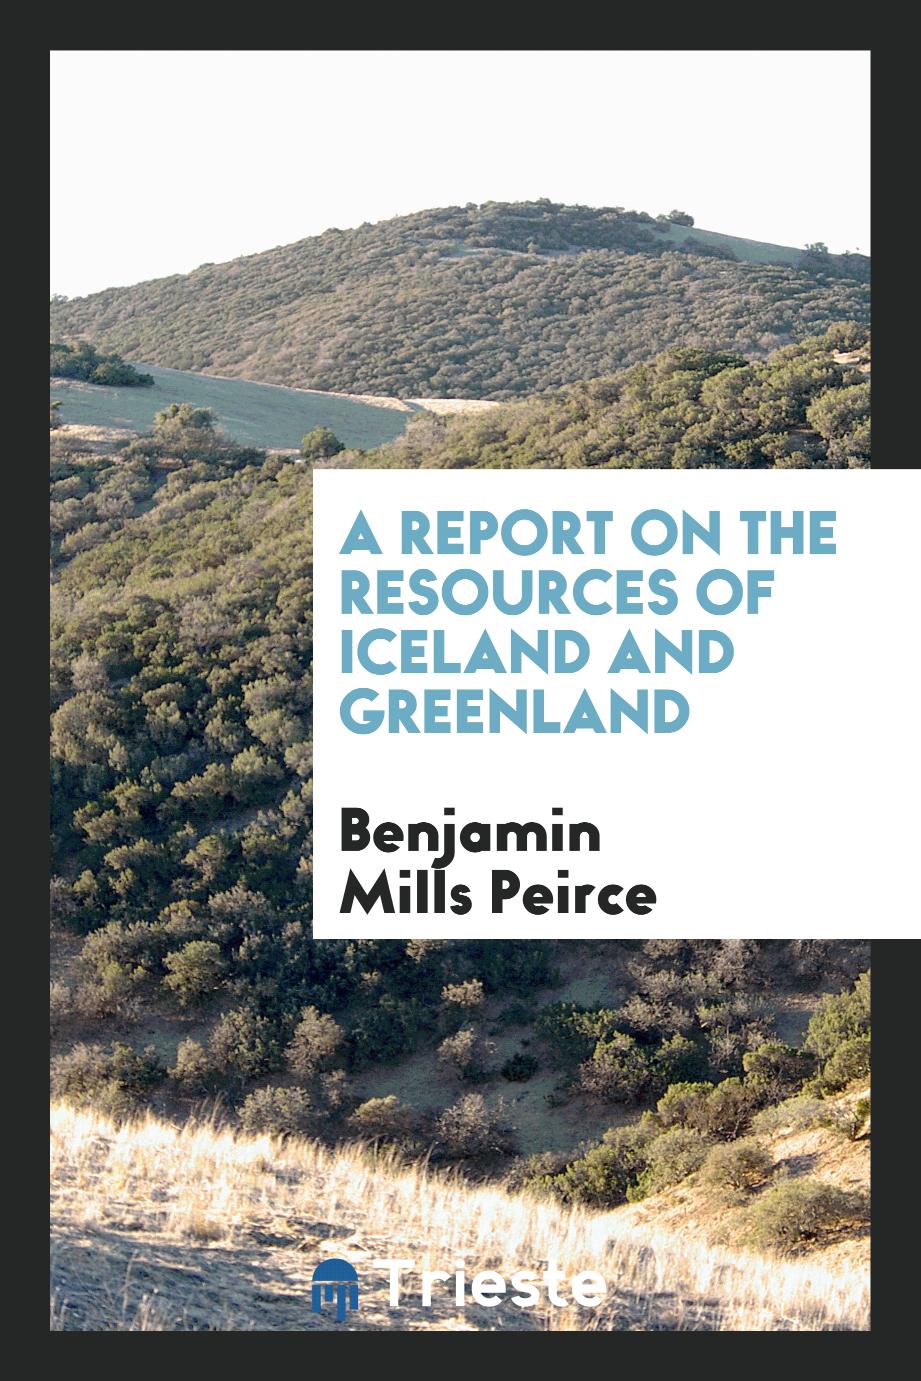 A Report on the Resources of Iceland and Greenland